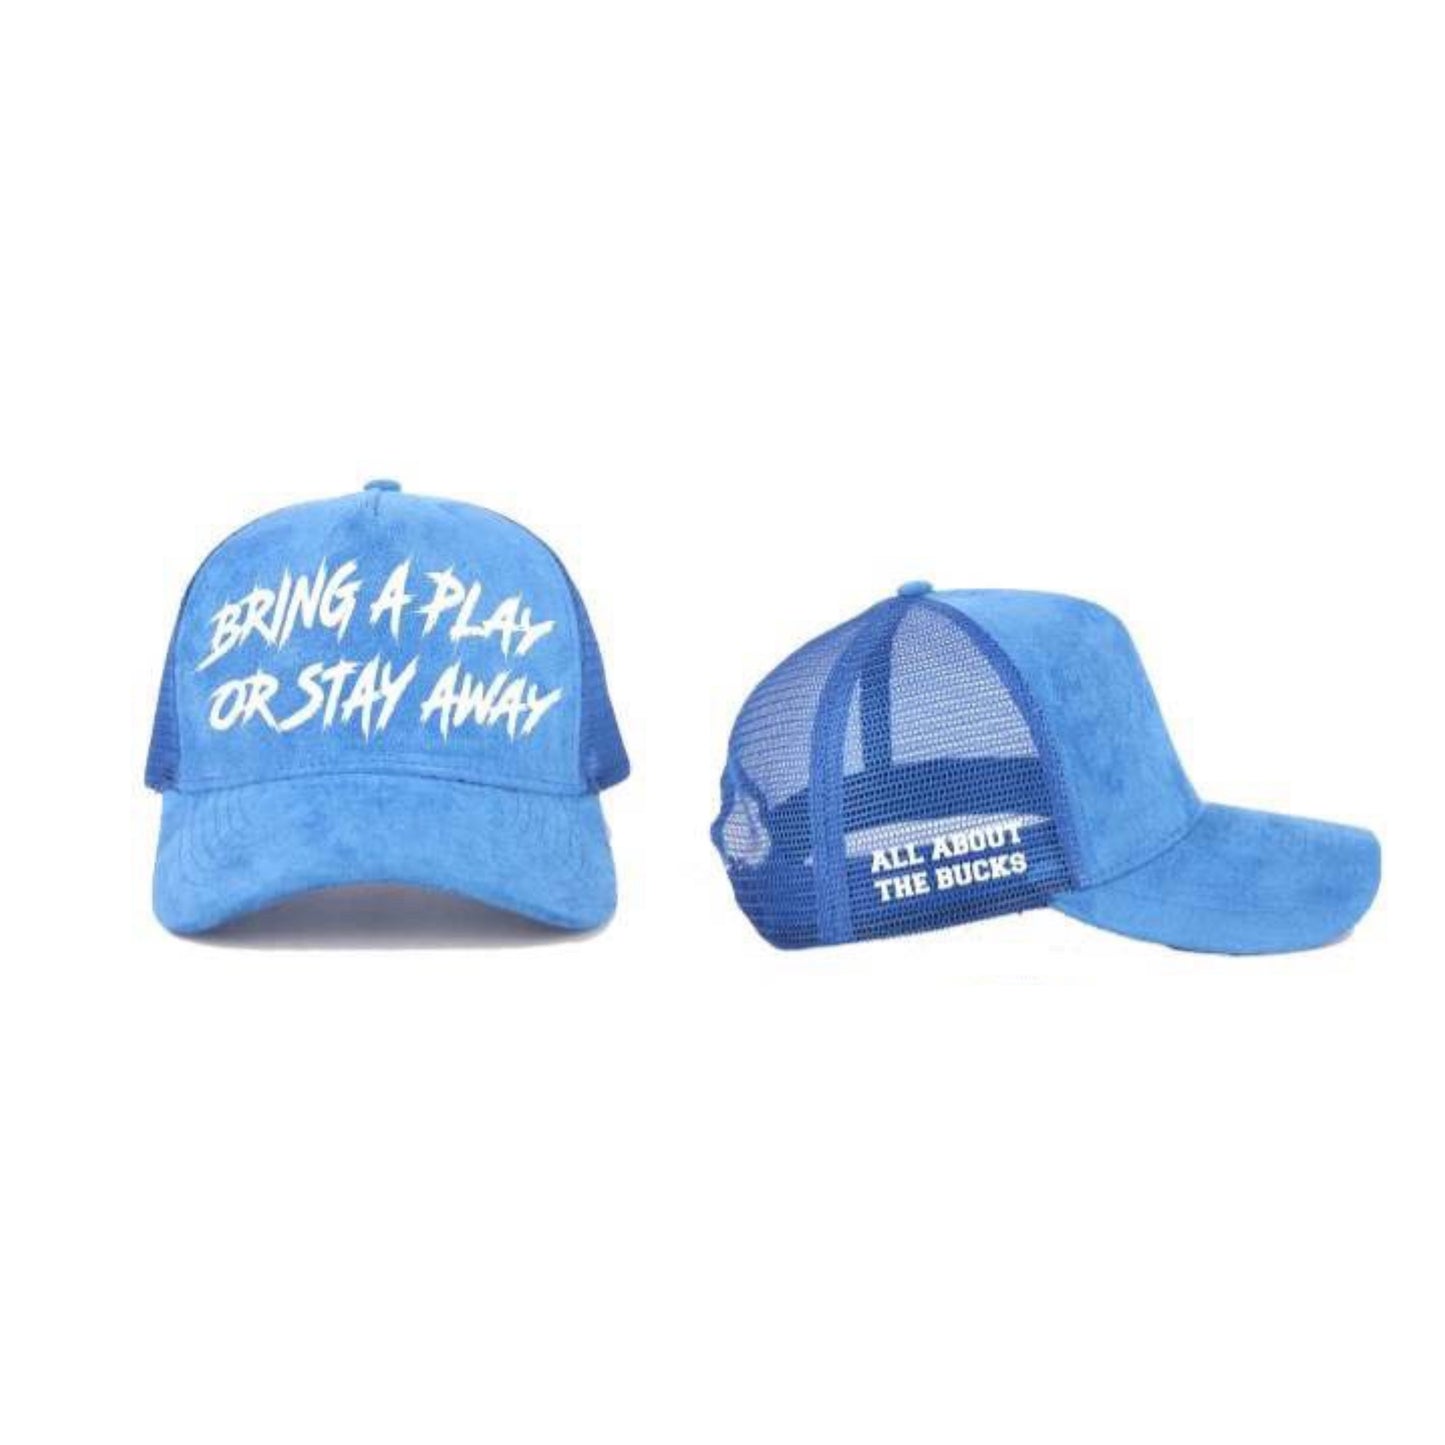 Bring A Play Or Stay Away Blue Trucker